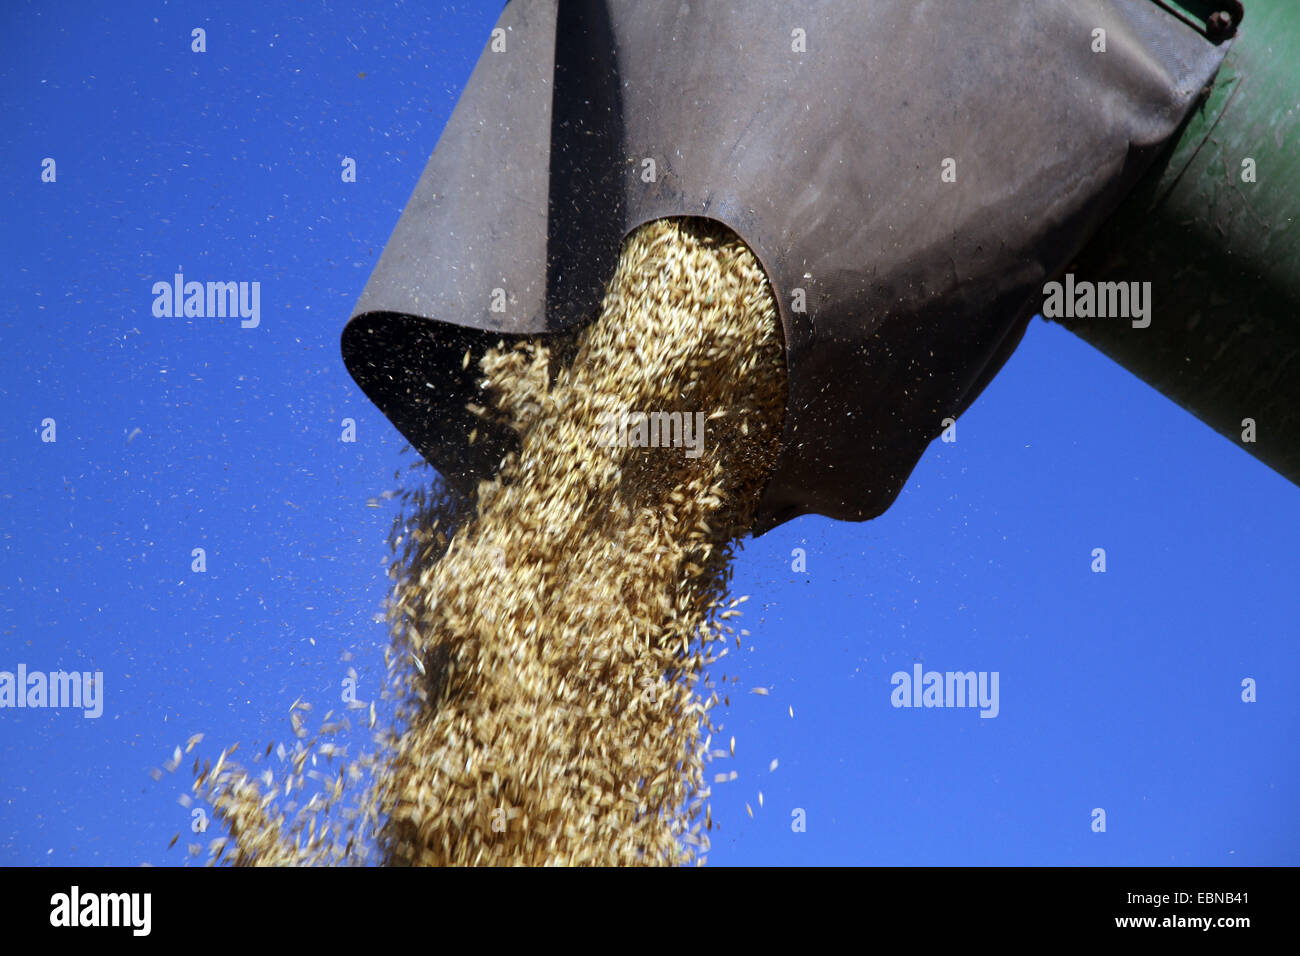 cultivated oat, common oat (Avena sativa), oat corns being eject from a harvester, Germany Stock Photo